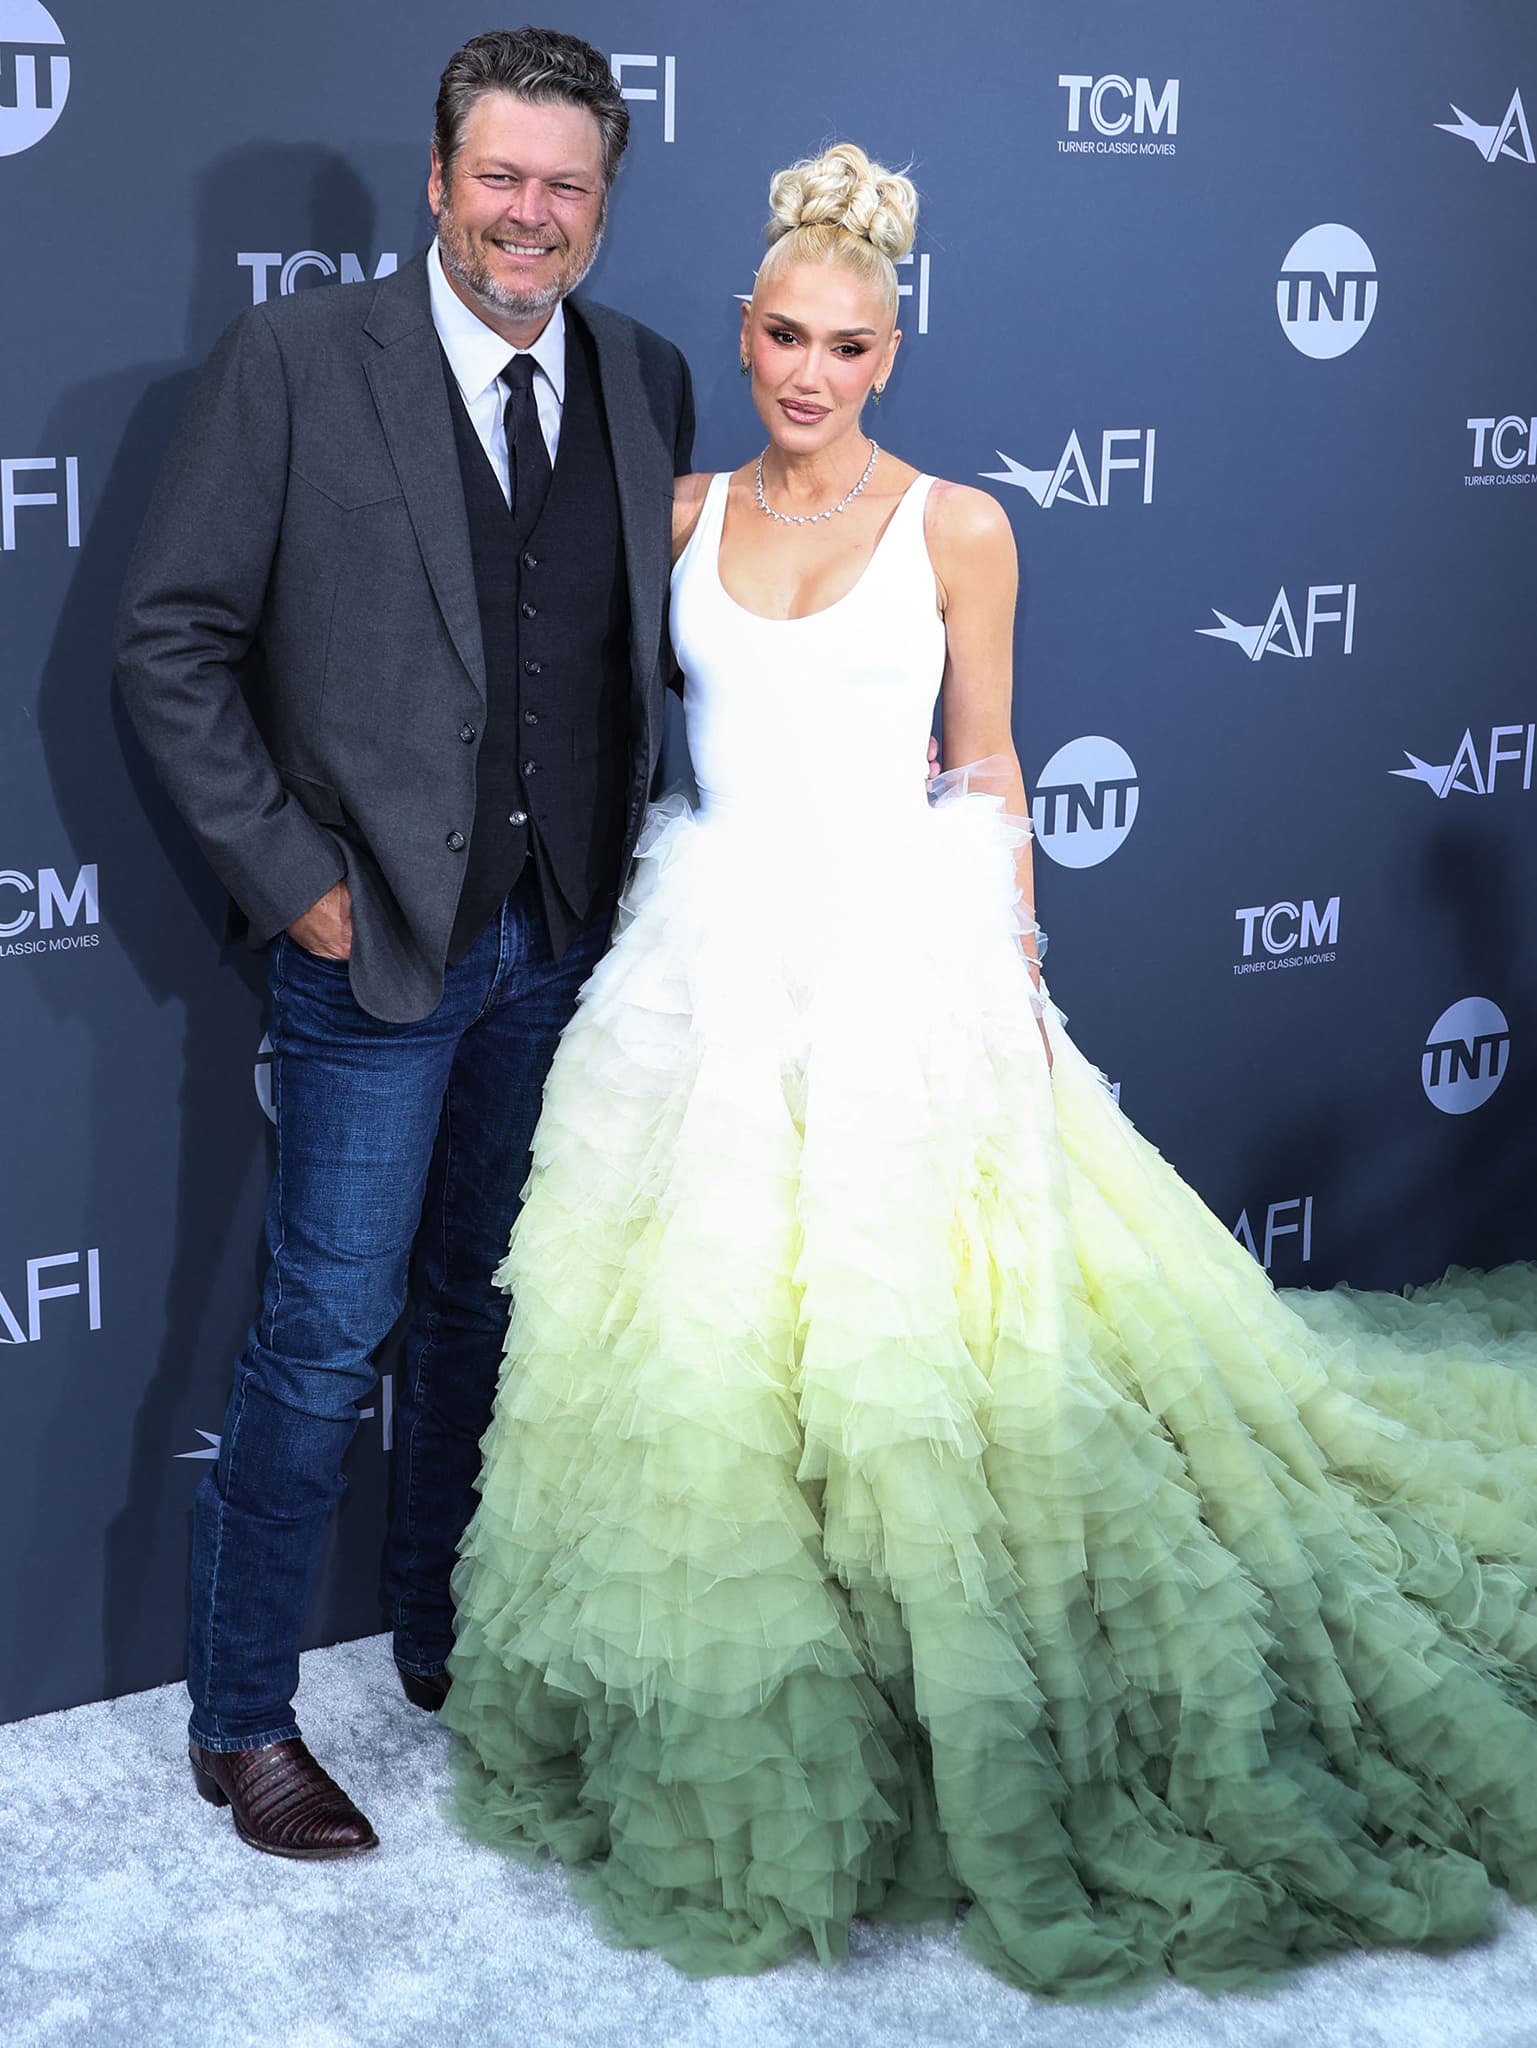 Blake Shelton joins wife Gwen Stefani on the red carpet at the 48th AFI Life Achievement Award Gala Tribute on June 9, 2022